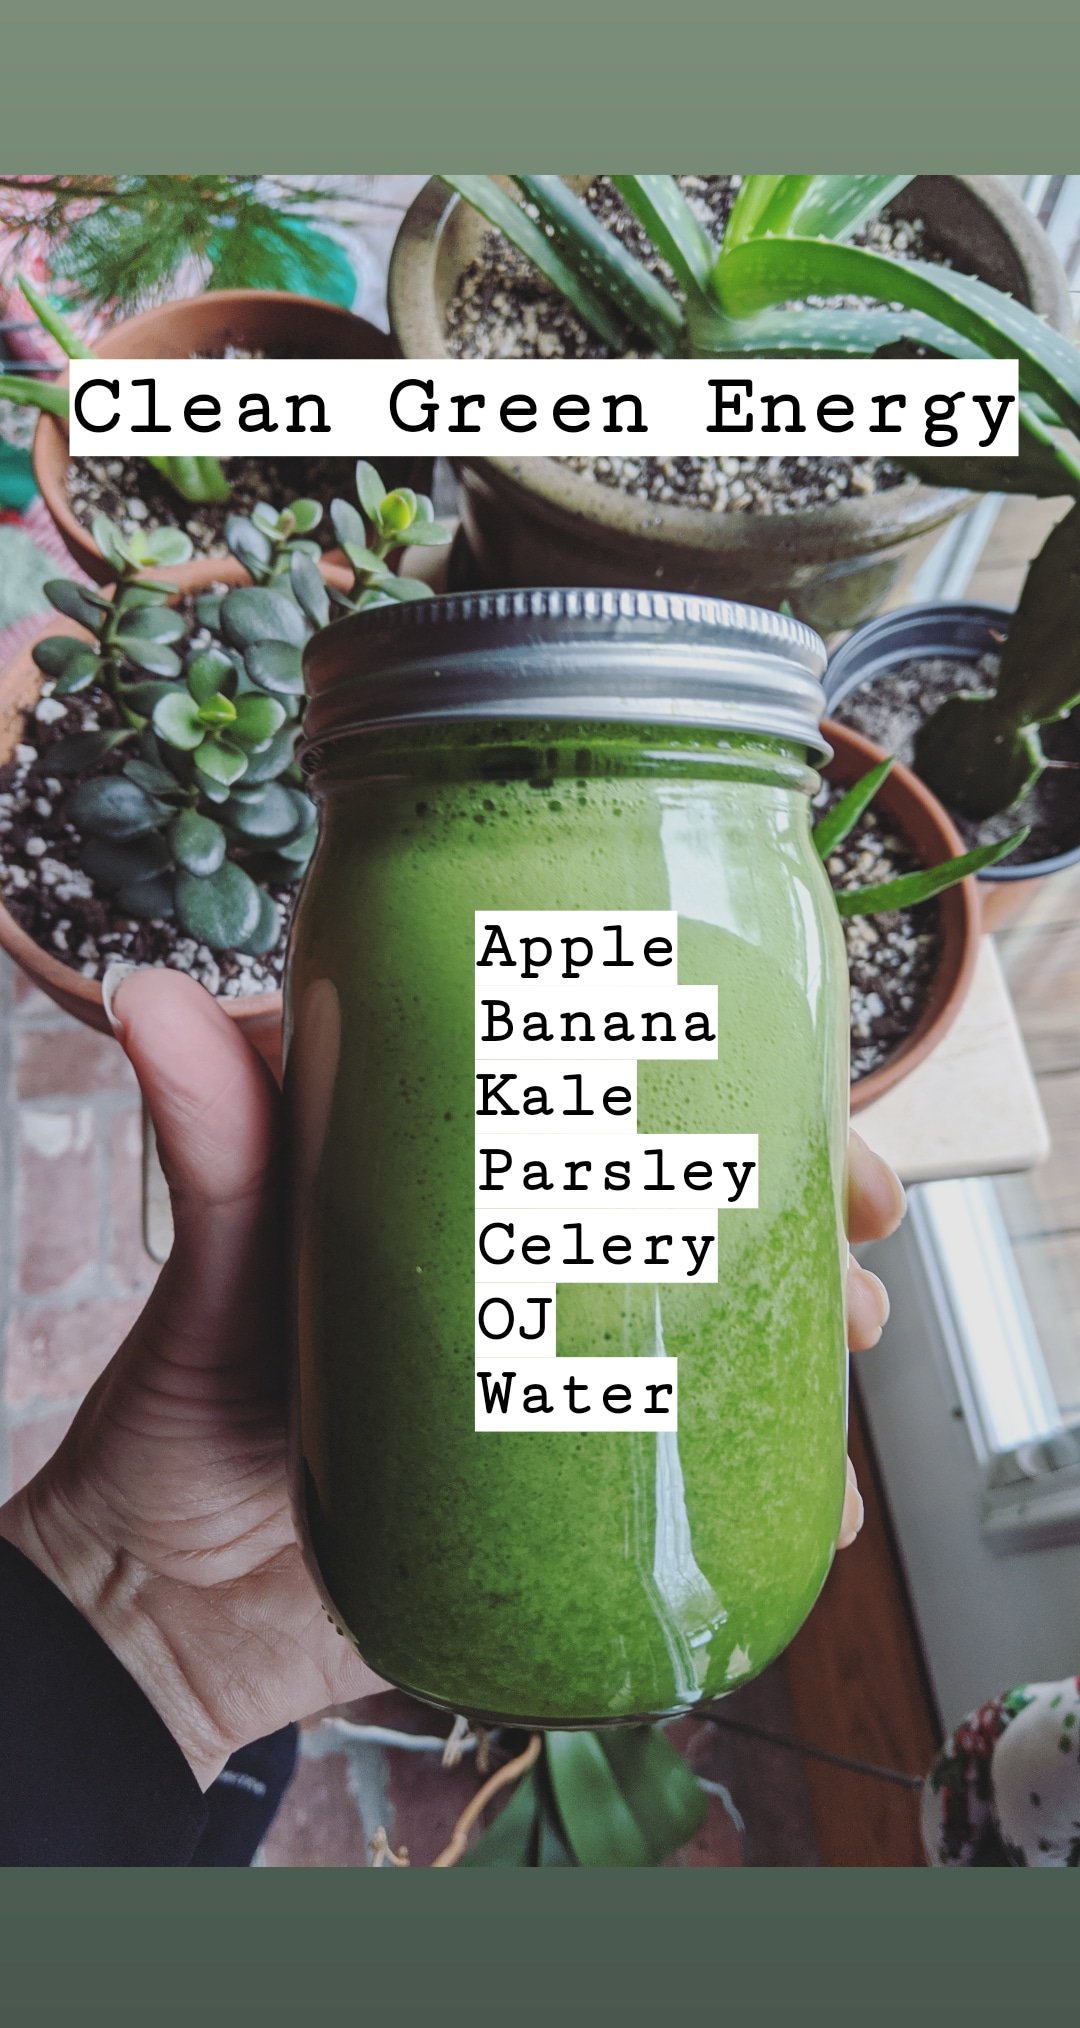 clean green energy smoothie recipe vegan dairy free fruits and vegetable smoothie with apple banana kale parsley celery orange juice and water